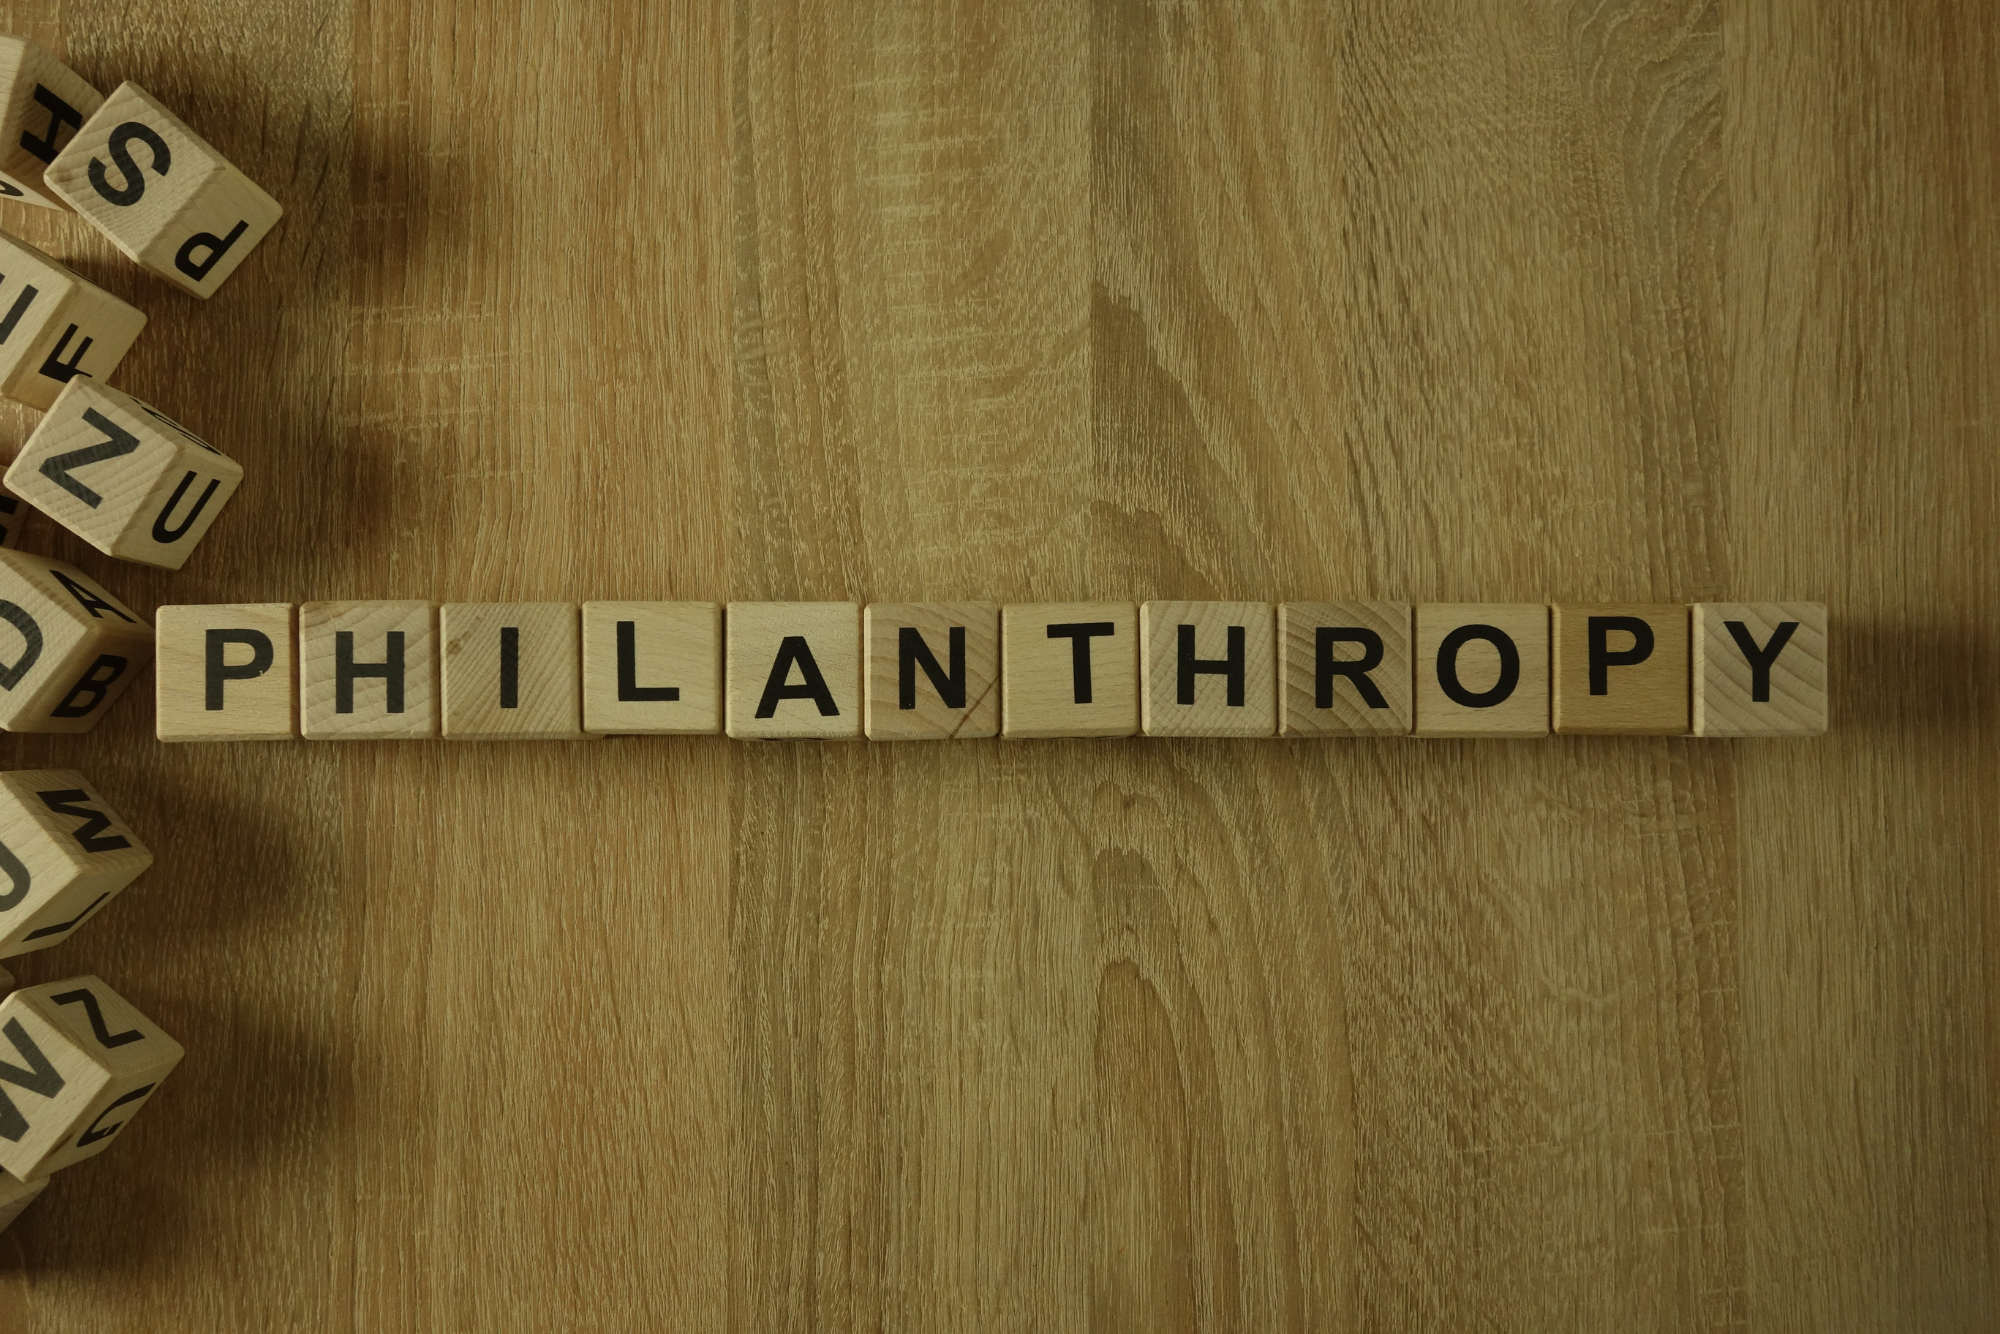 What Is a Philanthropy Advisor And What Do They Do?